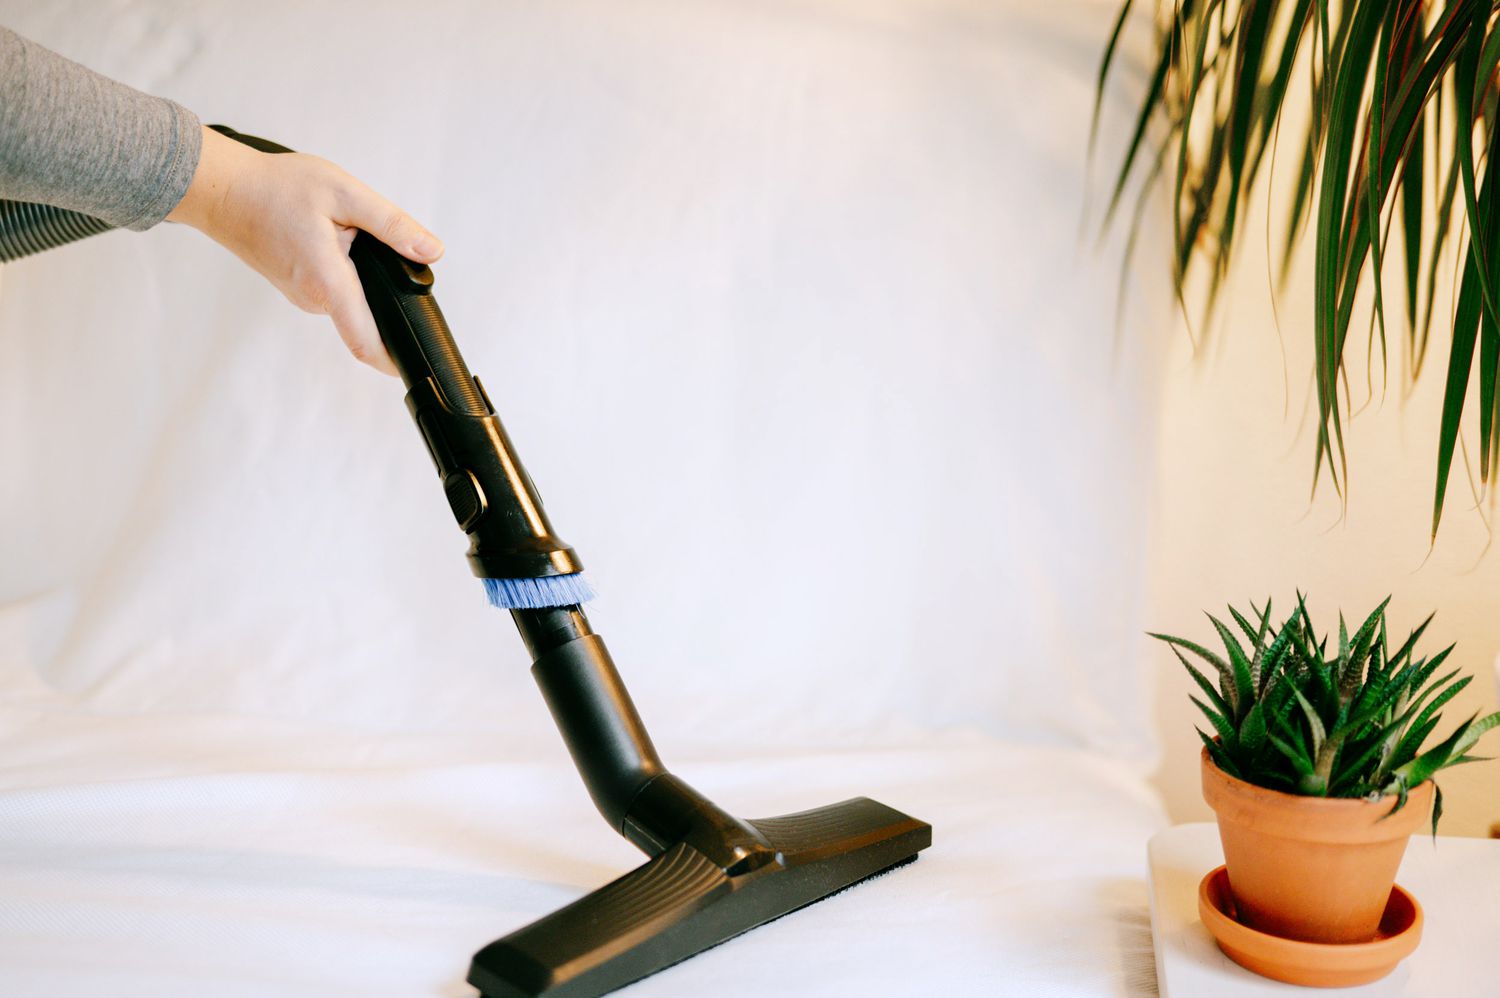 Vacuum cleaning up matted fibers from white synthetic fabric cushion